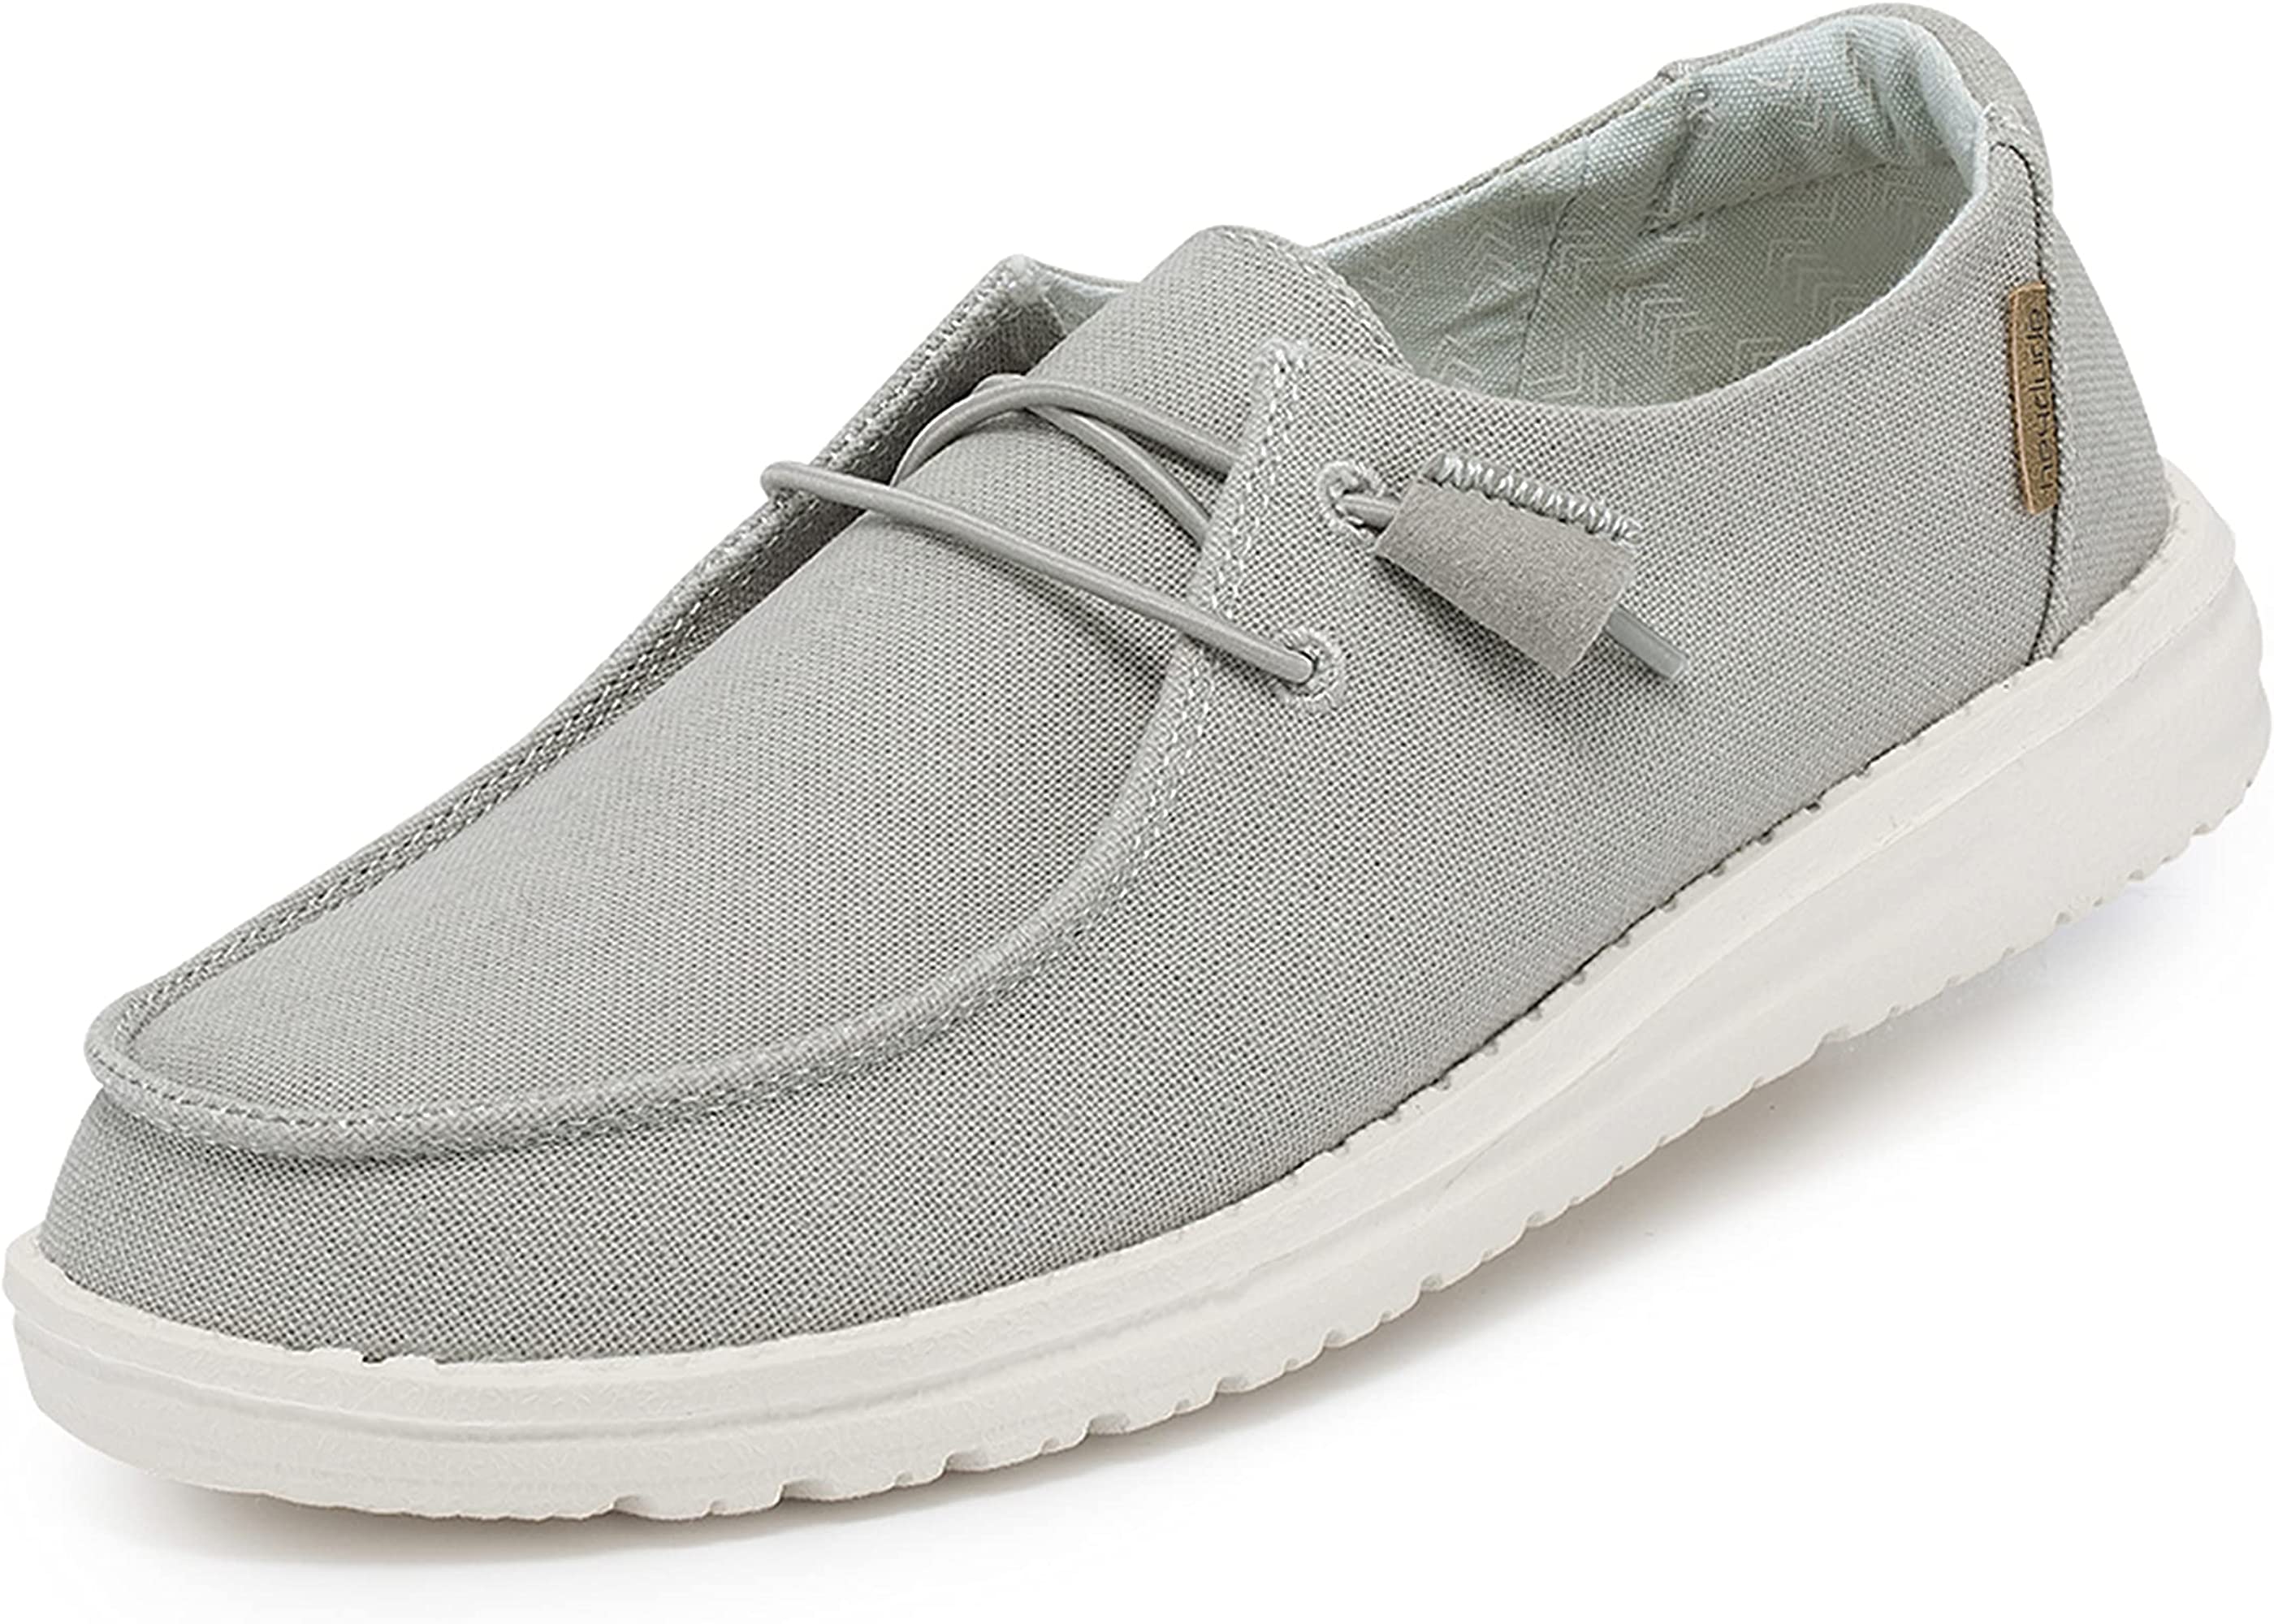 Hey Dude Womens Wendy Loafer - Chambray Light Grey - Size 10